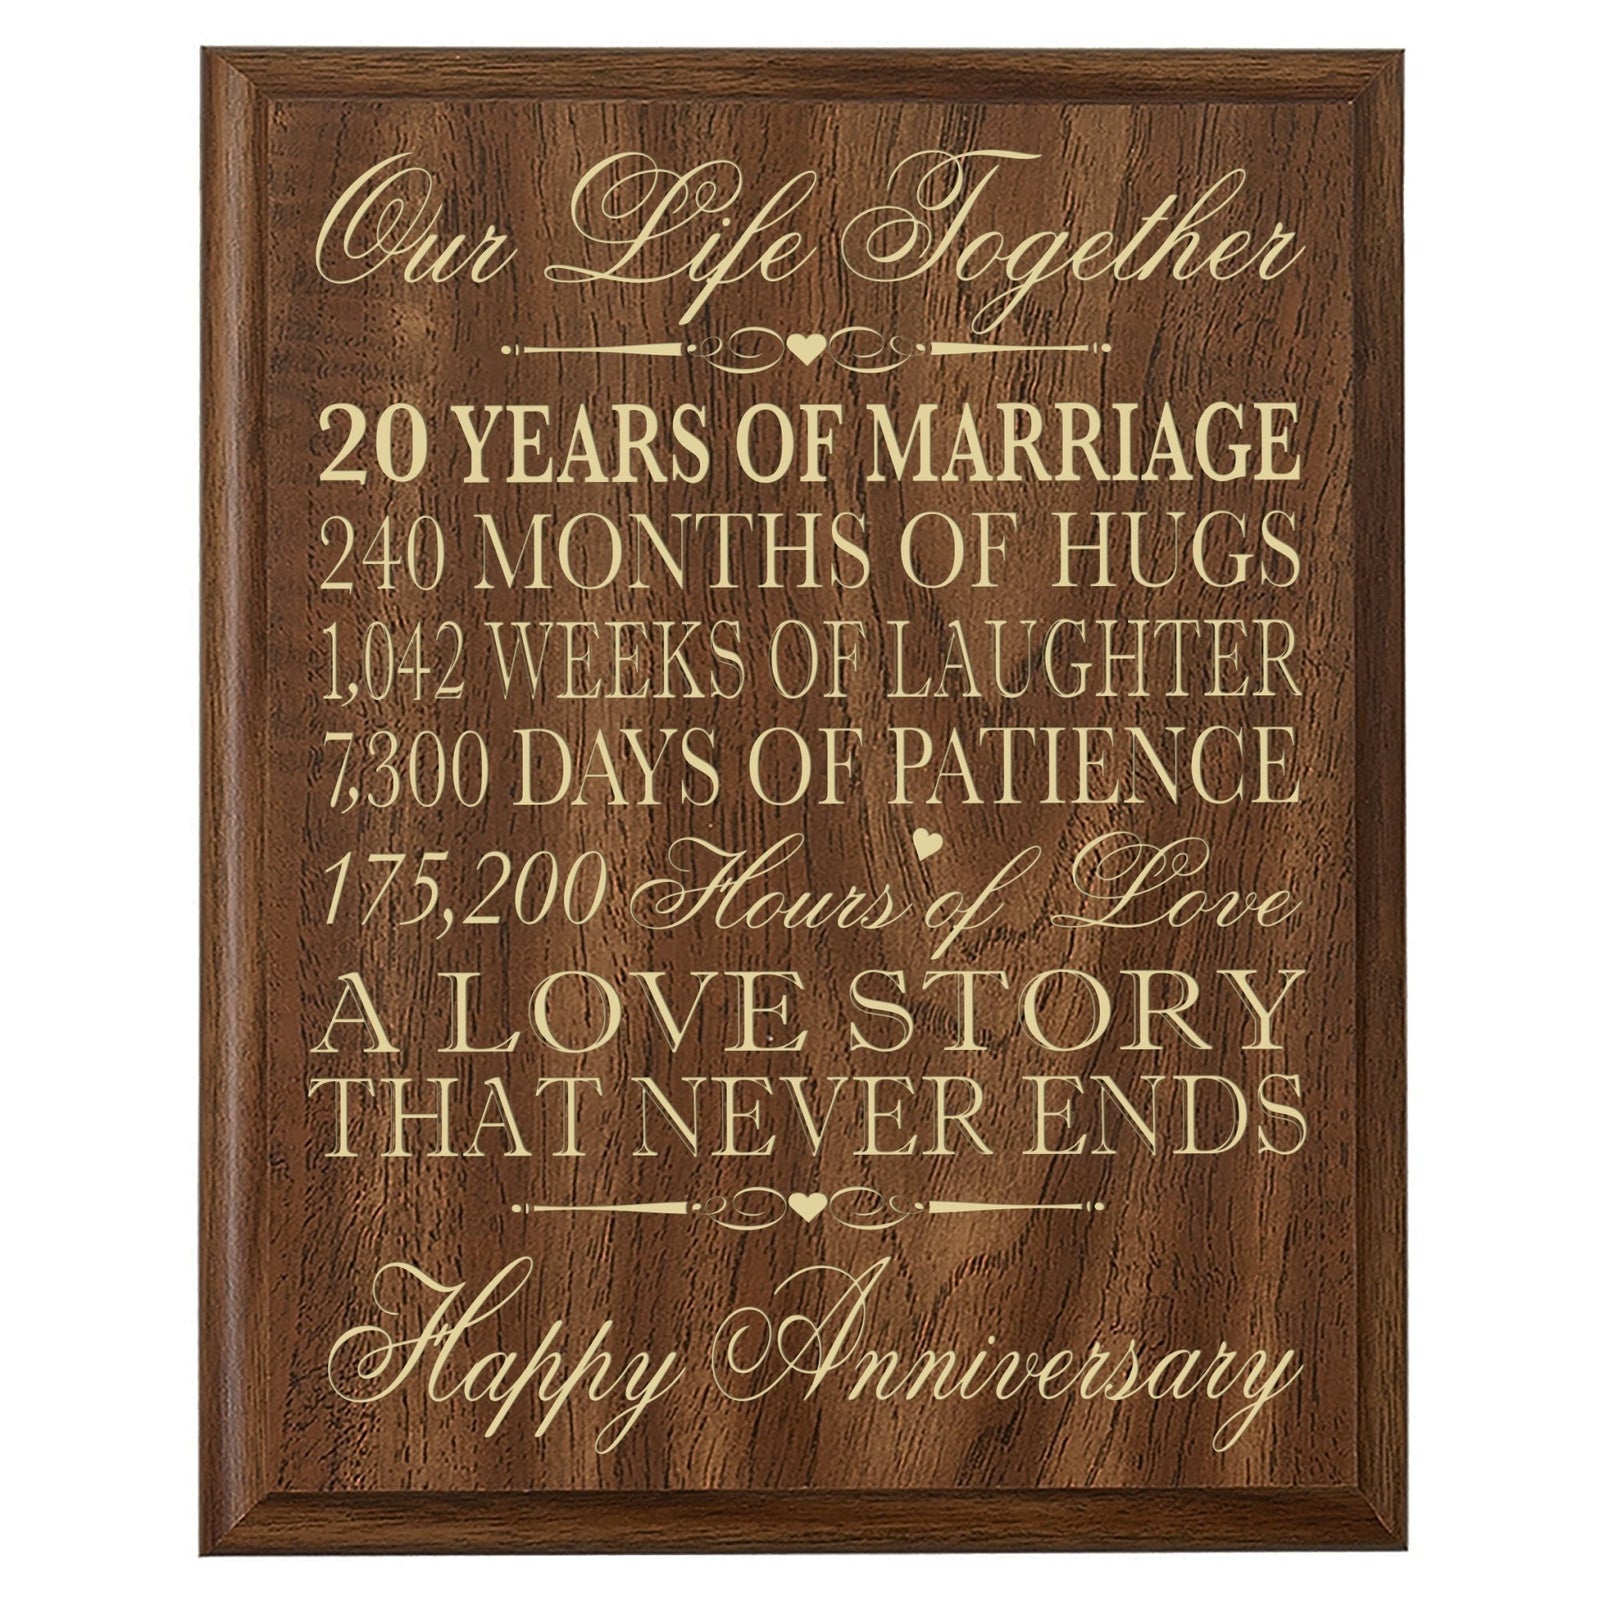 Our Life Together Anniversary Wall Plaque - 20th Anniversary - LifeSong Milestones